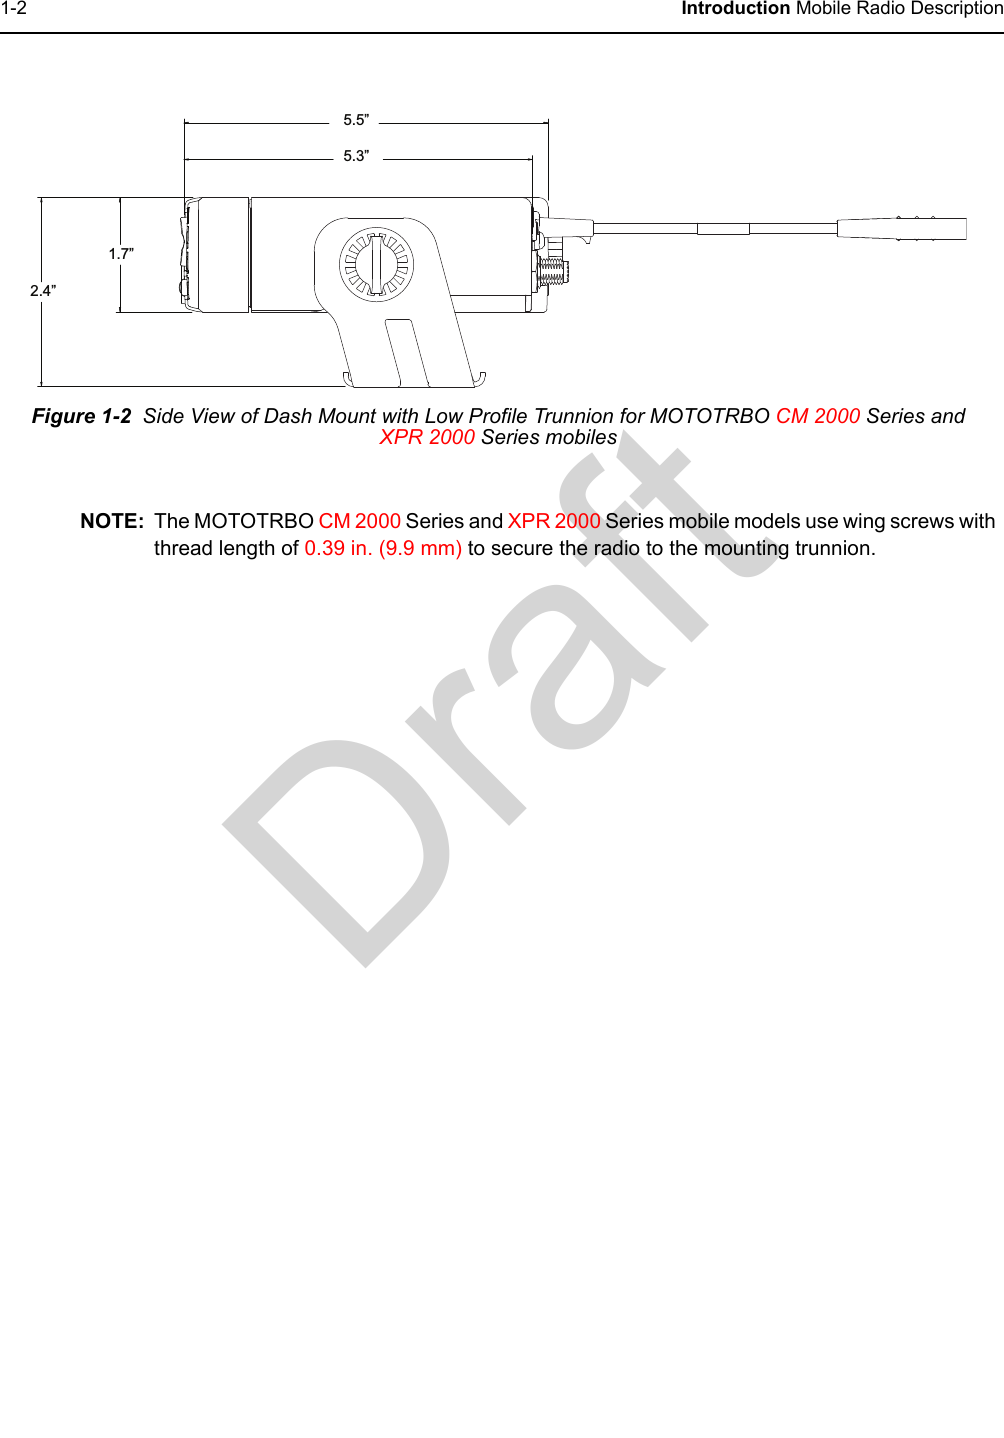 Draft1-2 Introduction Mobile Radio DescriptionNOTE: The MOTOTRBO CM 2000 Series and XPR 2000 Series mobile models use wing screws with thread length of 0.39 in. (9.9 mm) to secure the radio to the mounting trunnion.Figure 1-2  Side View of Dash Mount with Low Profile Trunnion for MOTOTRBO CM 2000 Series and XPR 2000 Series mobiles5.5”5.3”1.7”2.4”